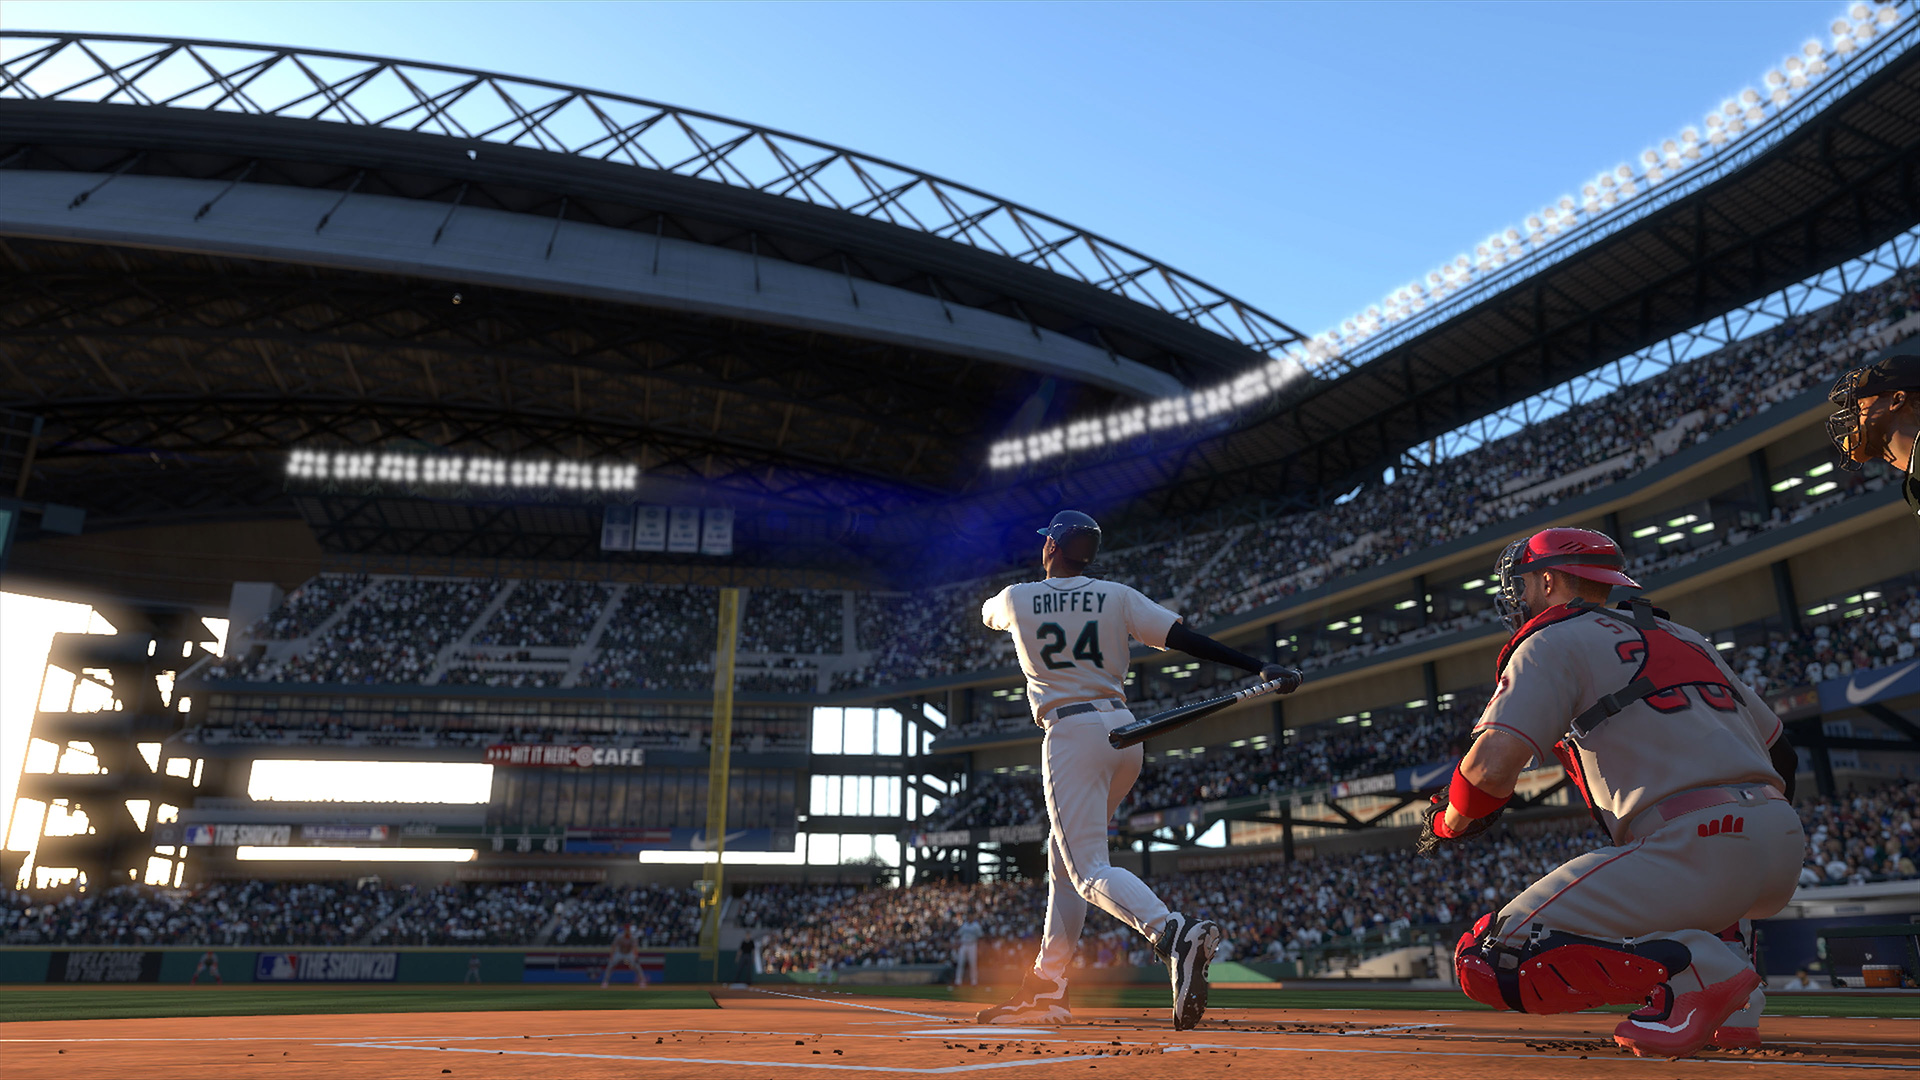 How MLB The Show became the most realistic baseball simulator